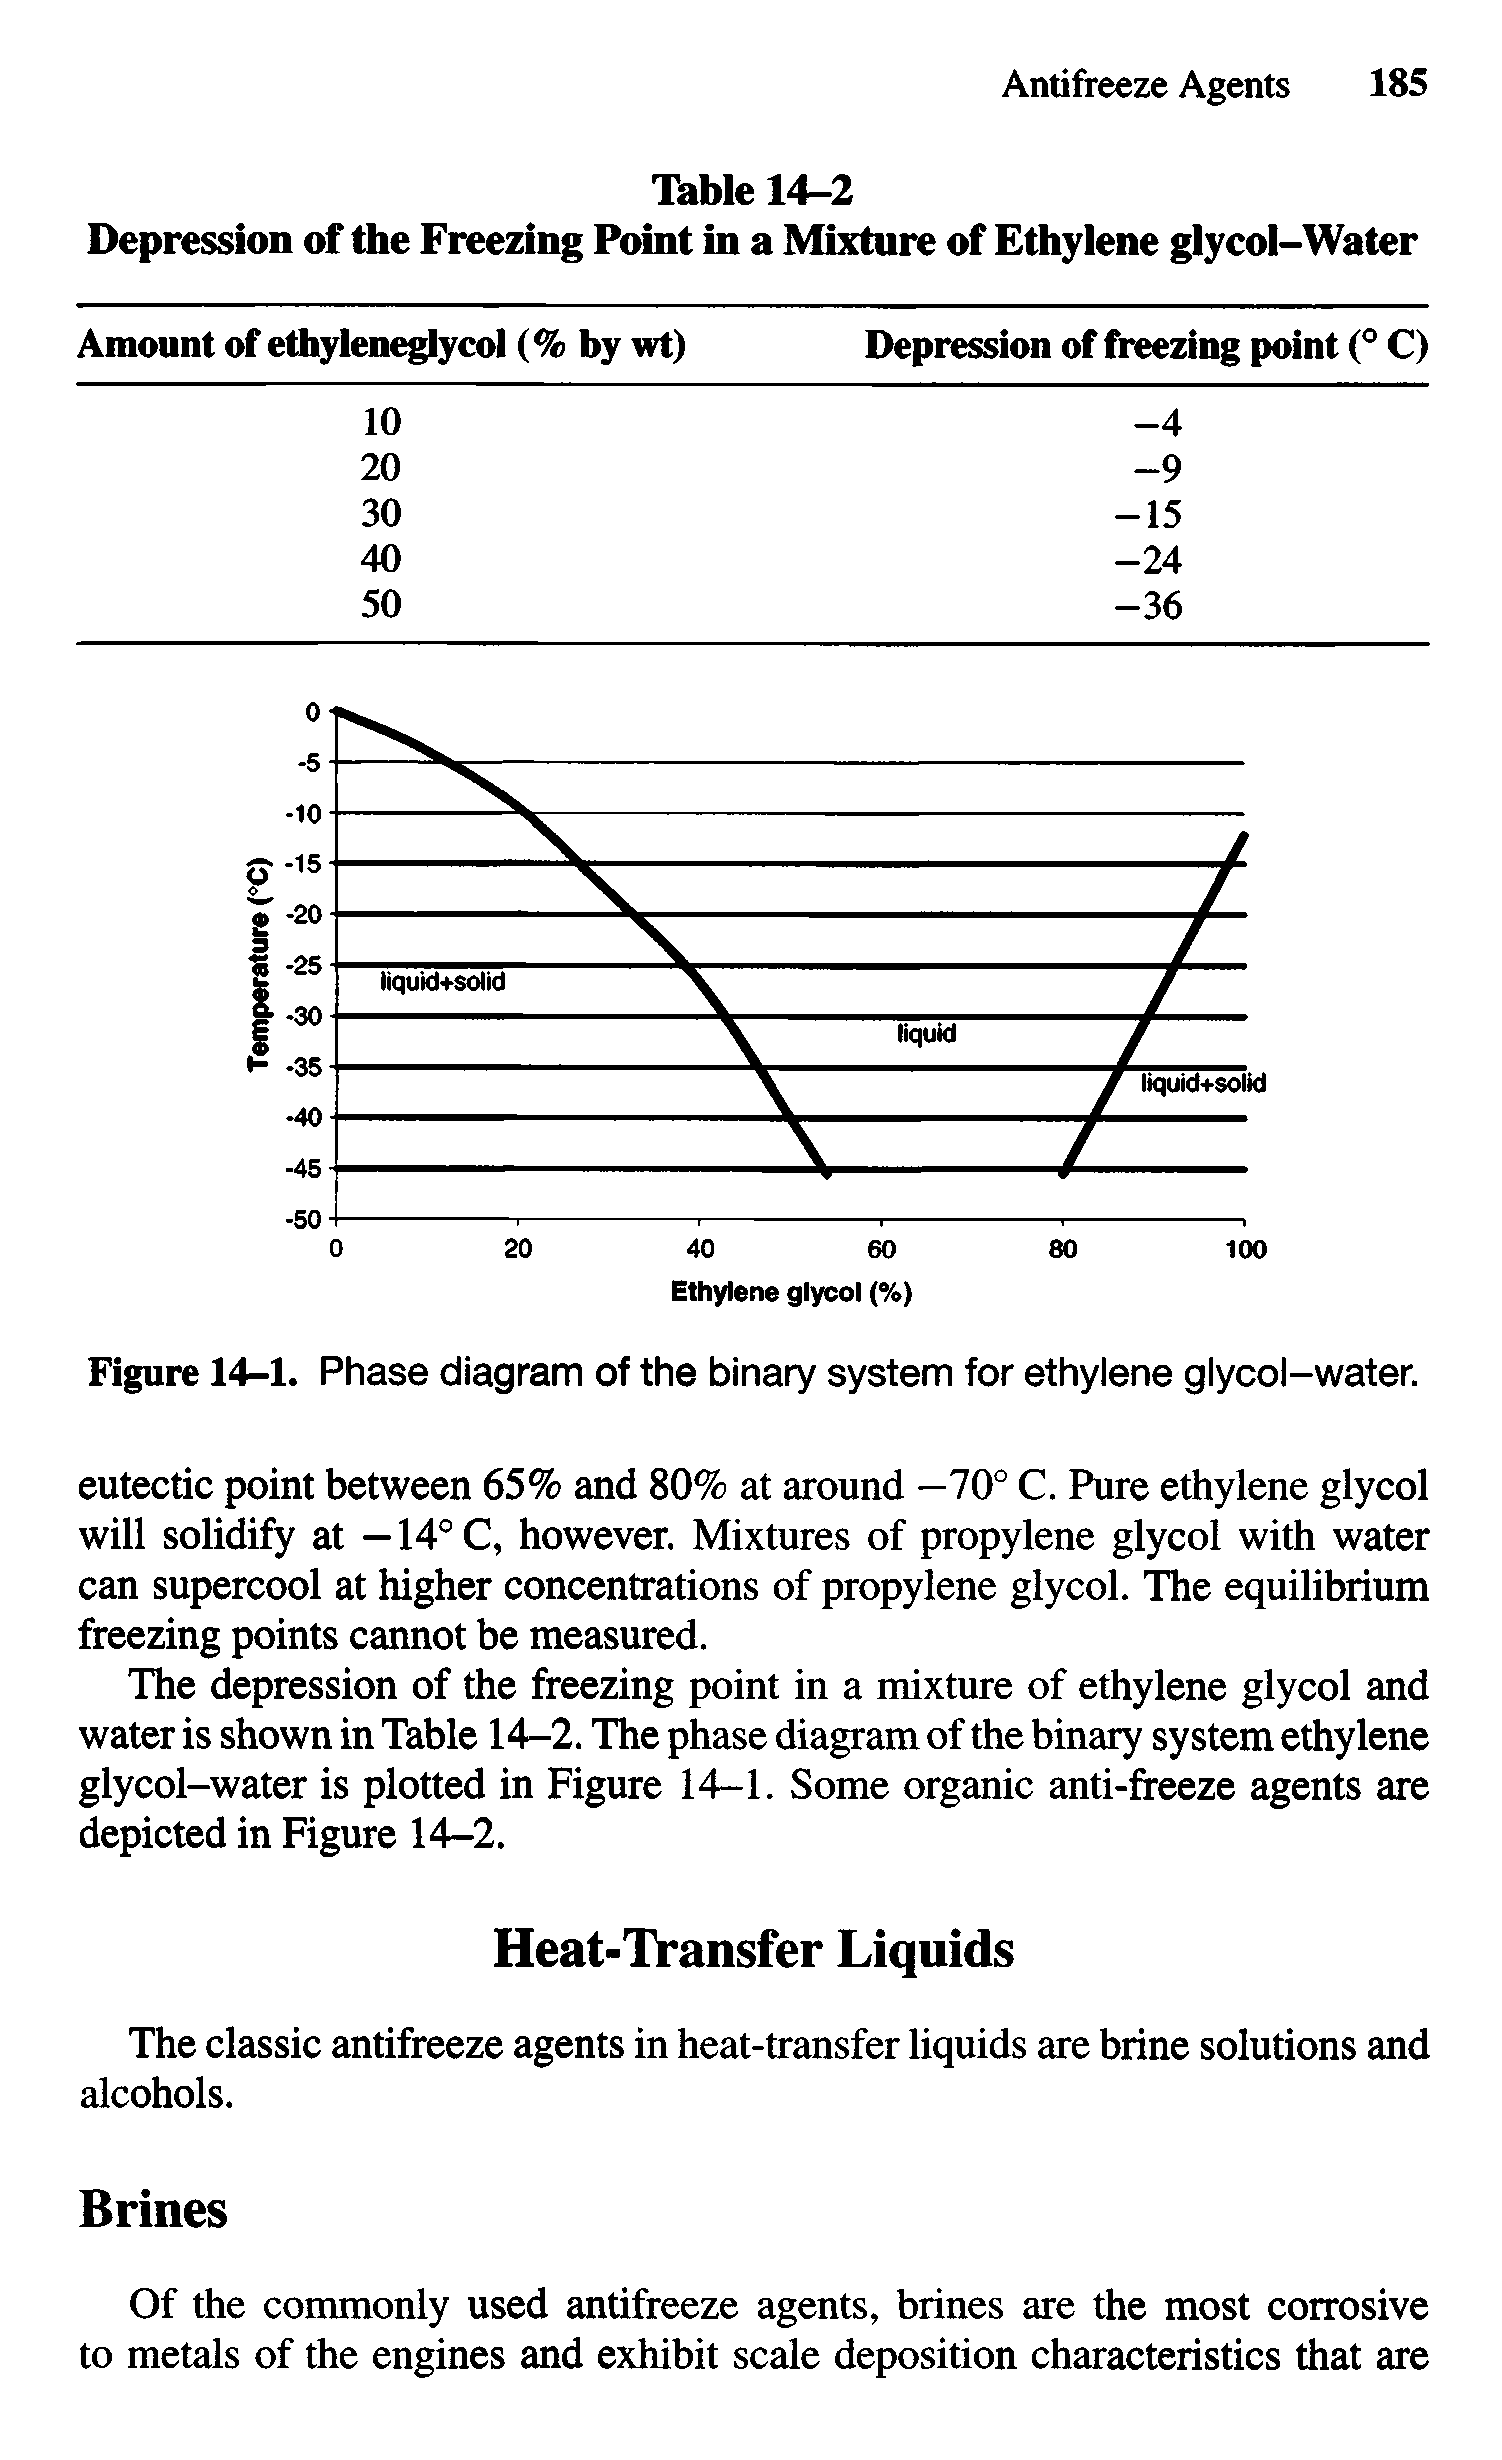 Figure 14-1. Phase diagram of the binary system for ethylene glycol-water.